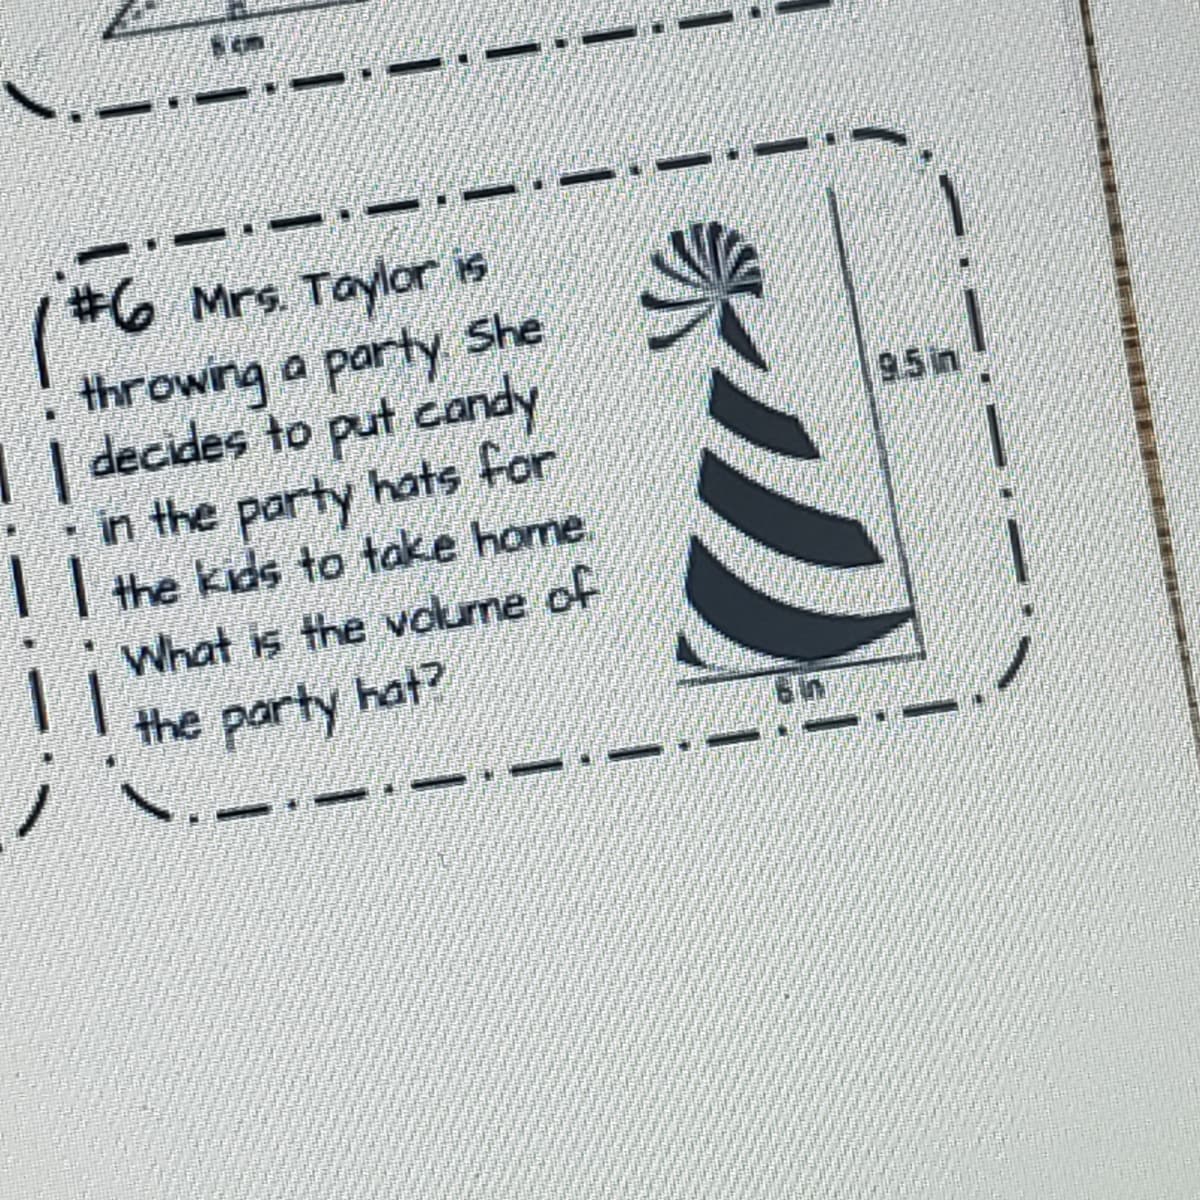 #6 Mrs. Taylor is
throwing a party She
| decides to put candy
in the party hats for
I the kids to take home.
95n
What is the volume of
the party hat?
